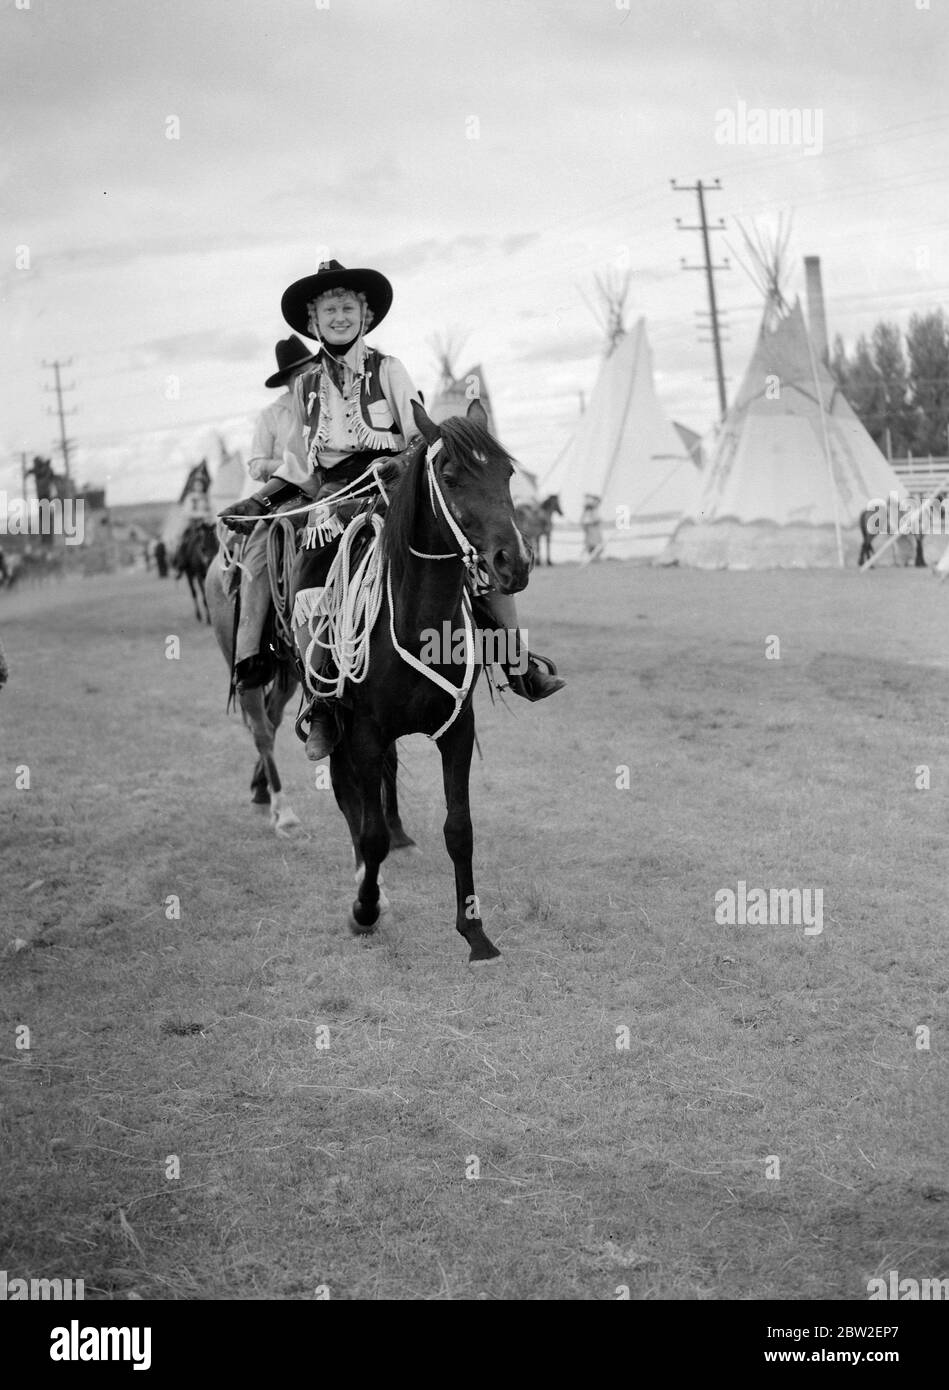 The Royal tour of Canada and the USA by King George VI and Queen Elizabeth , 1939 A Canadian cowgirl who rode on her fine horse to greet the King and Queen during their journey through the Prairie lands of Canada. 1939 Stock Photo